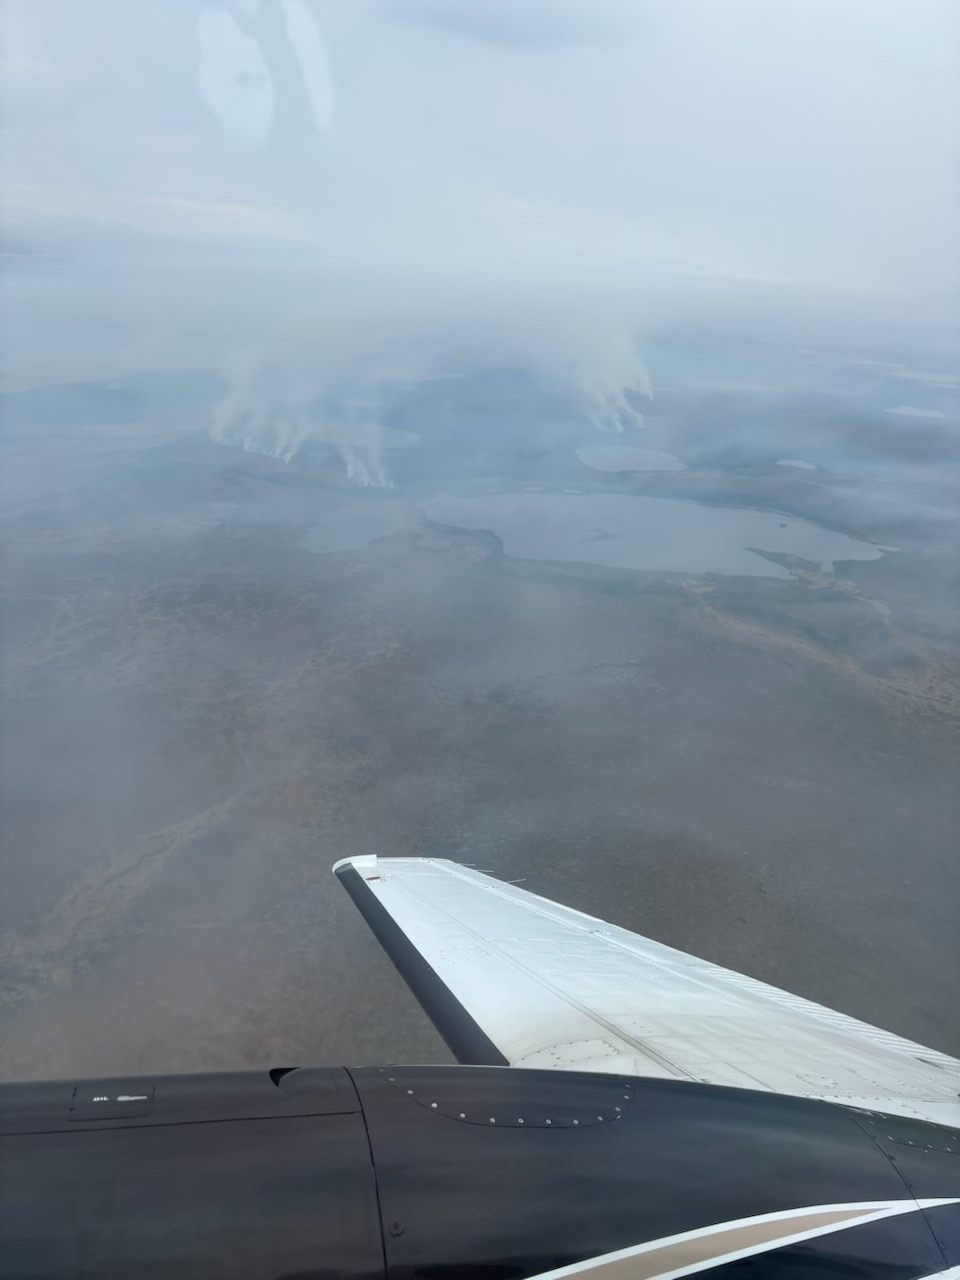 Hazy image from wildfire smoke. Smoke rising from the tundra below a spotter airplane.